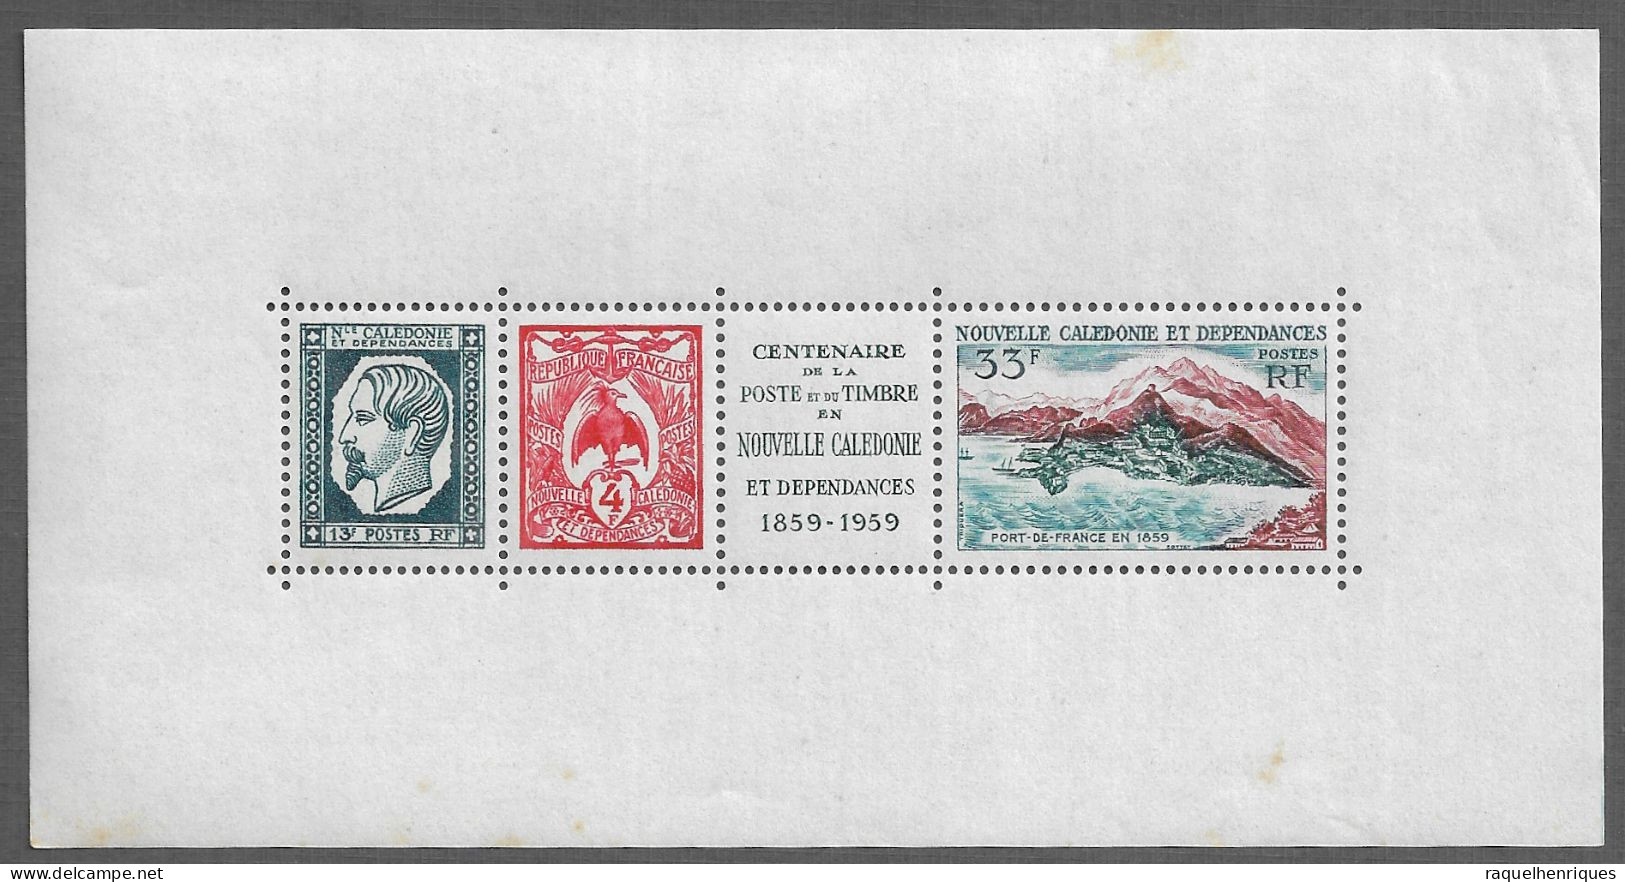 NEW CALEDONIA STAMP - 1960 The 100th Anniversary Of Postal Service In New Caledonia (NP#67-P39-L9) - Neufs